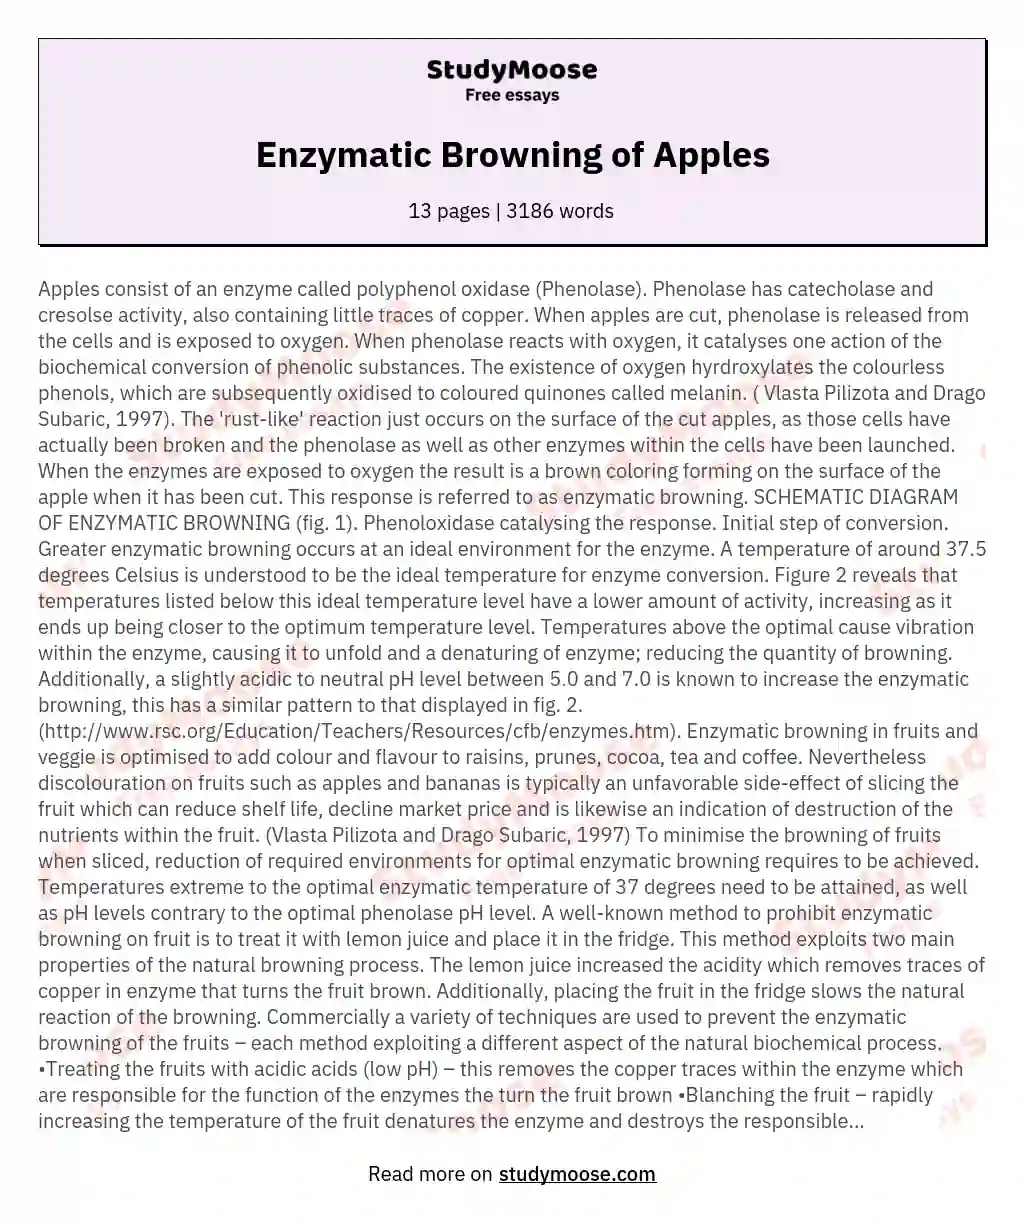 Enzymatic Browning of Apples